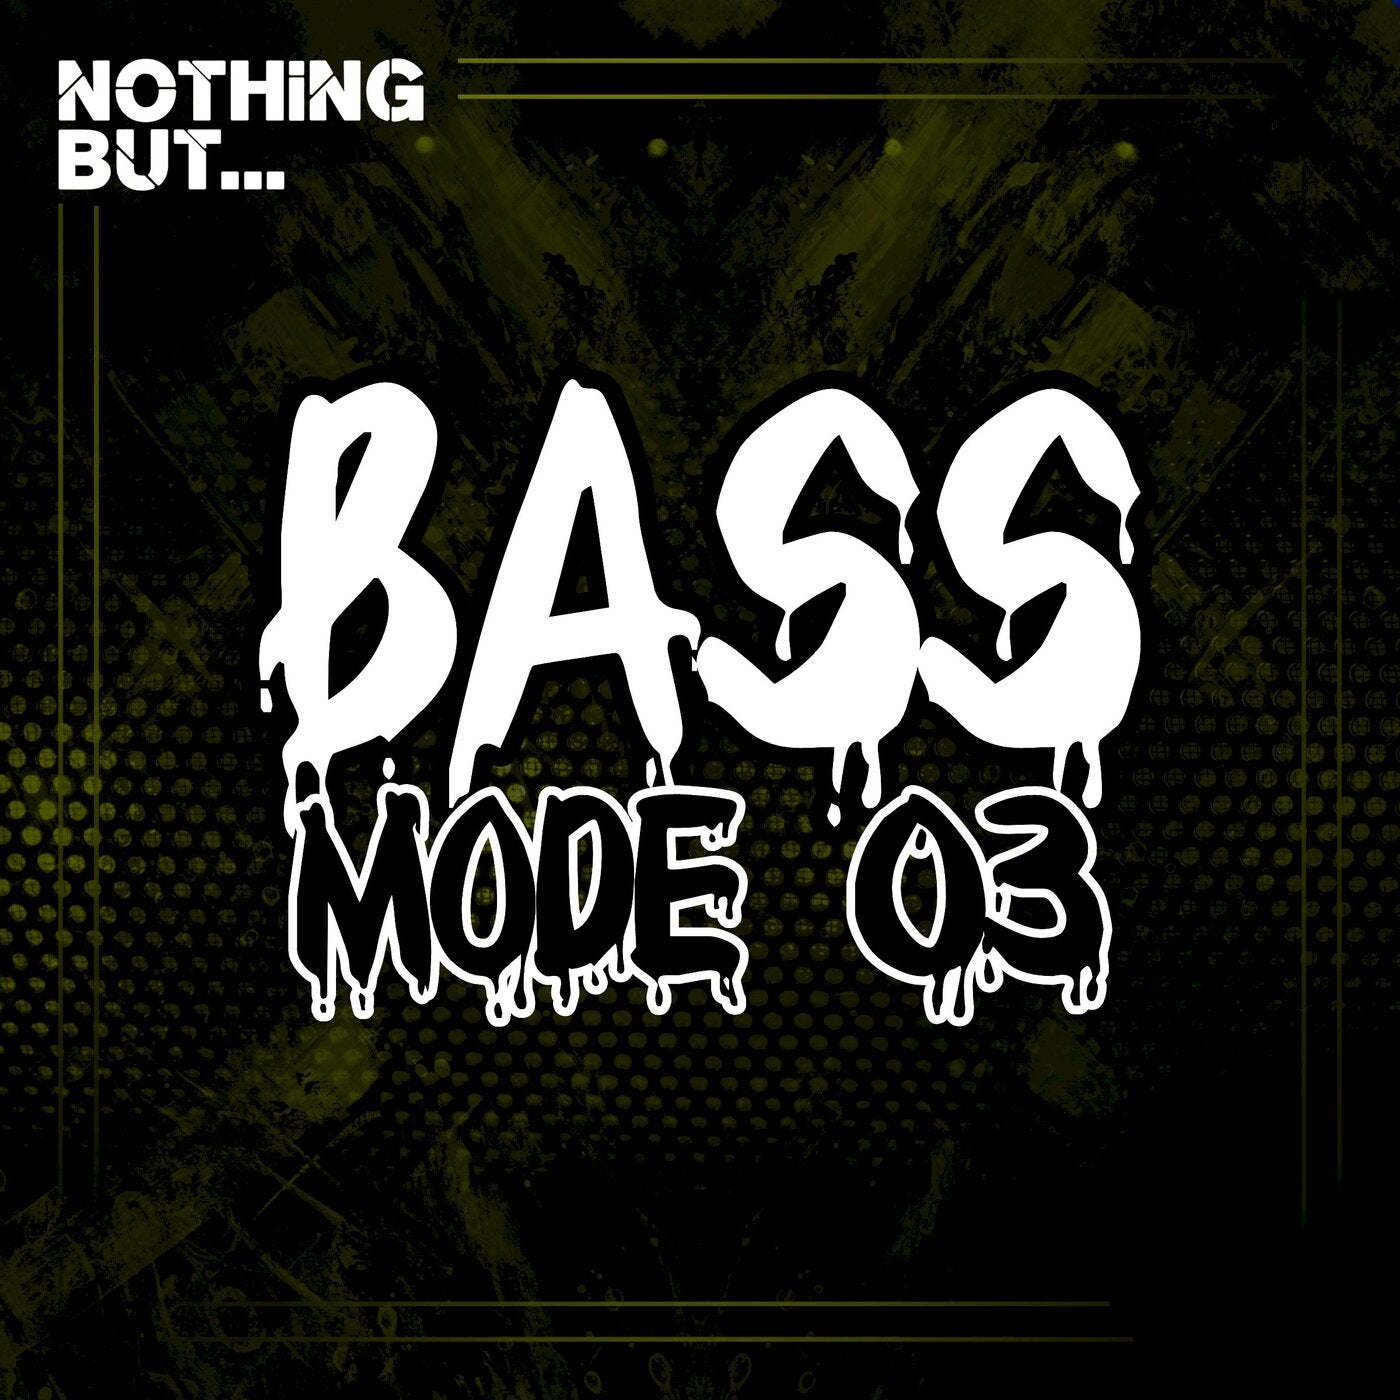 Nothing But... Bass Mode, Vol. 03